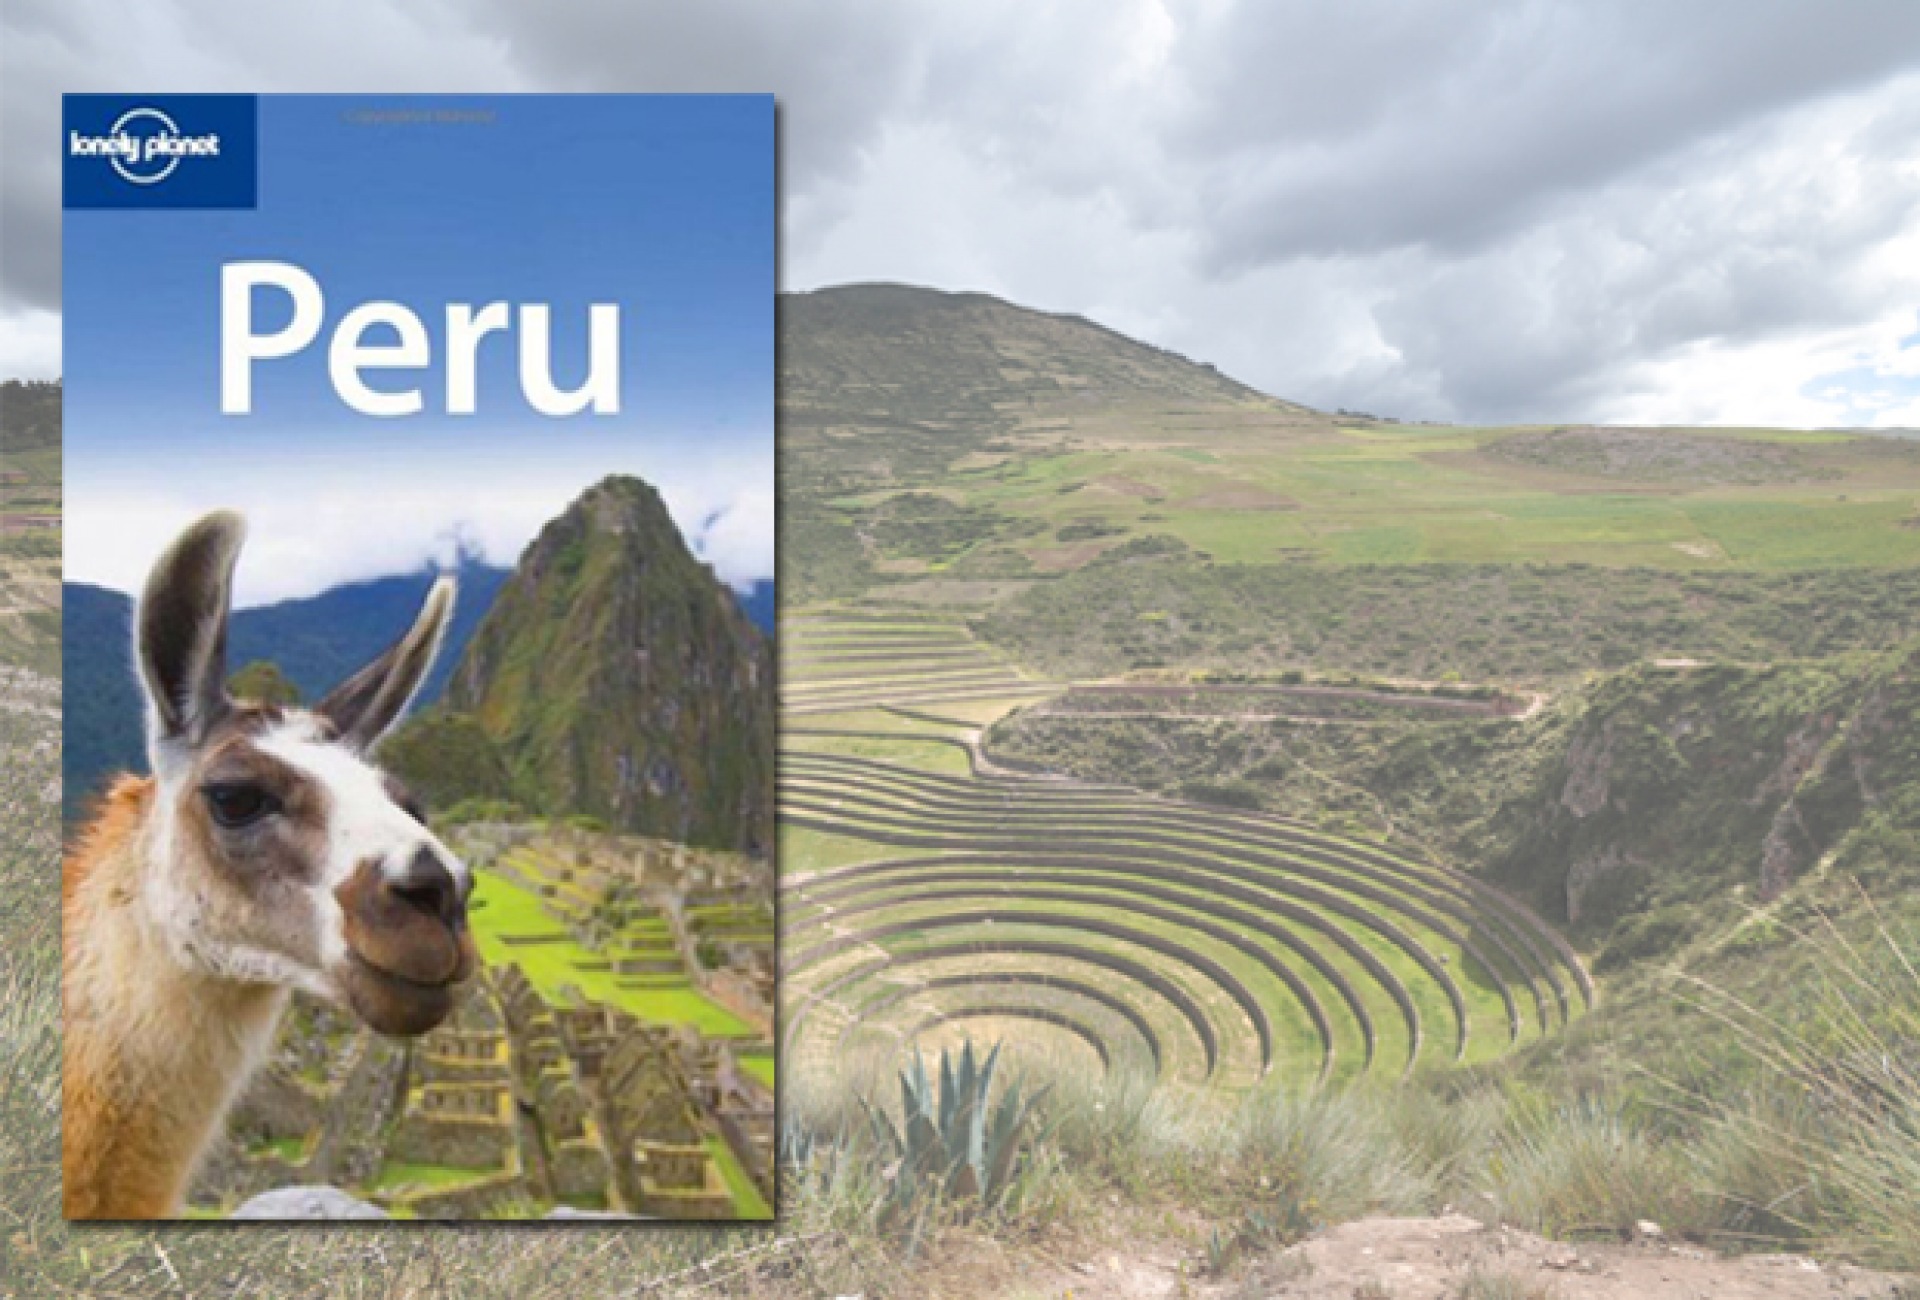 Lonely Planet Peru - we wrote the book!